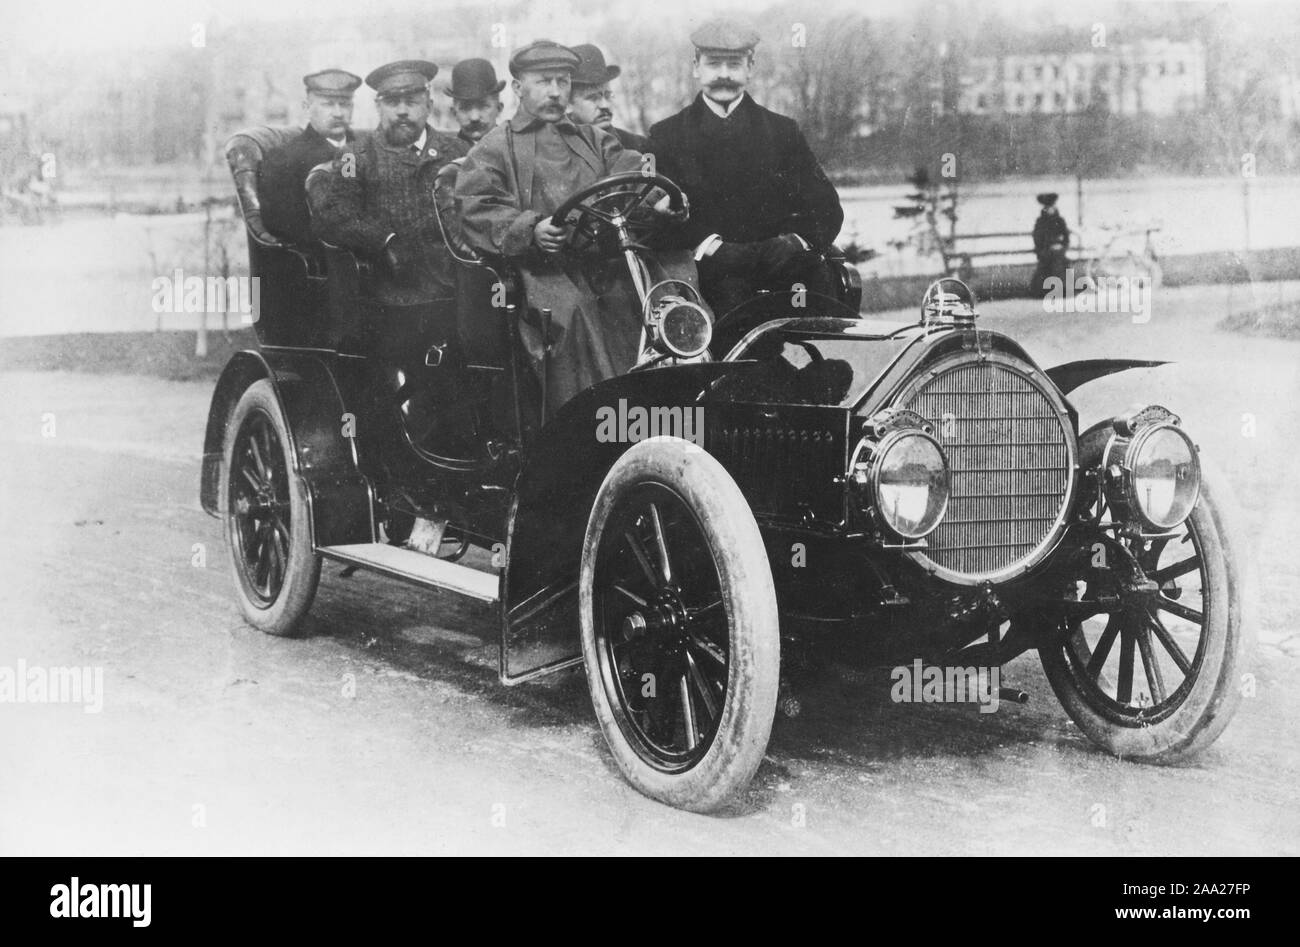 Motoring history. The boardmembers of the swedish royal automobile club, Sam Hellberg, Percy Tamma and Emil Saelmson are sitting in a car made by the german manufacturer Nag, Neue Automobil-Gesellschaft. Sweden 1906 Stock Photo